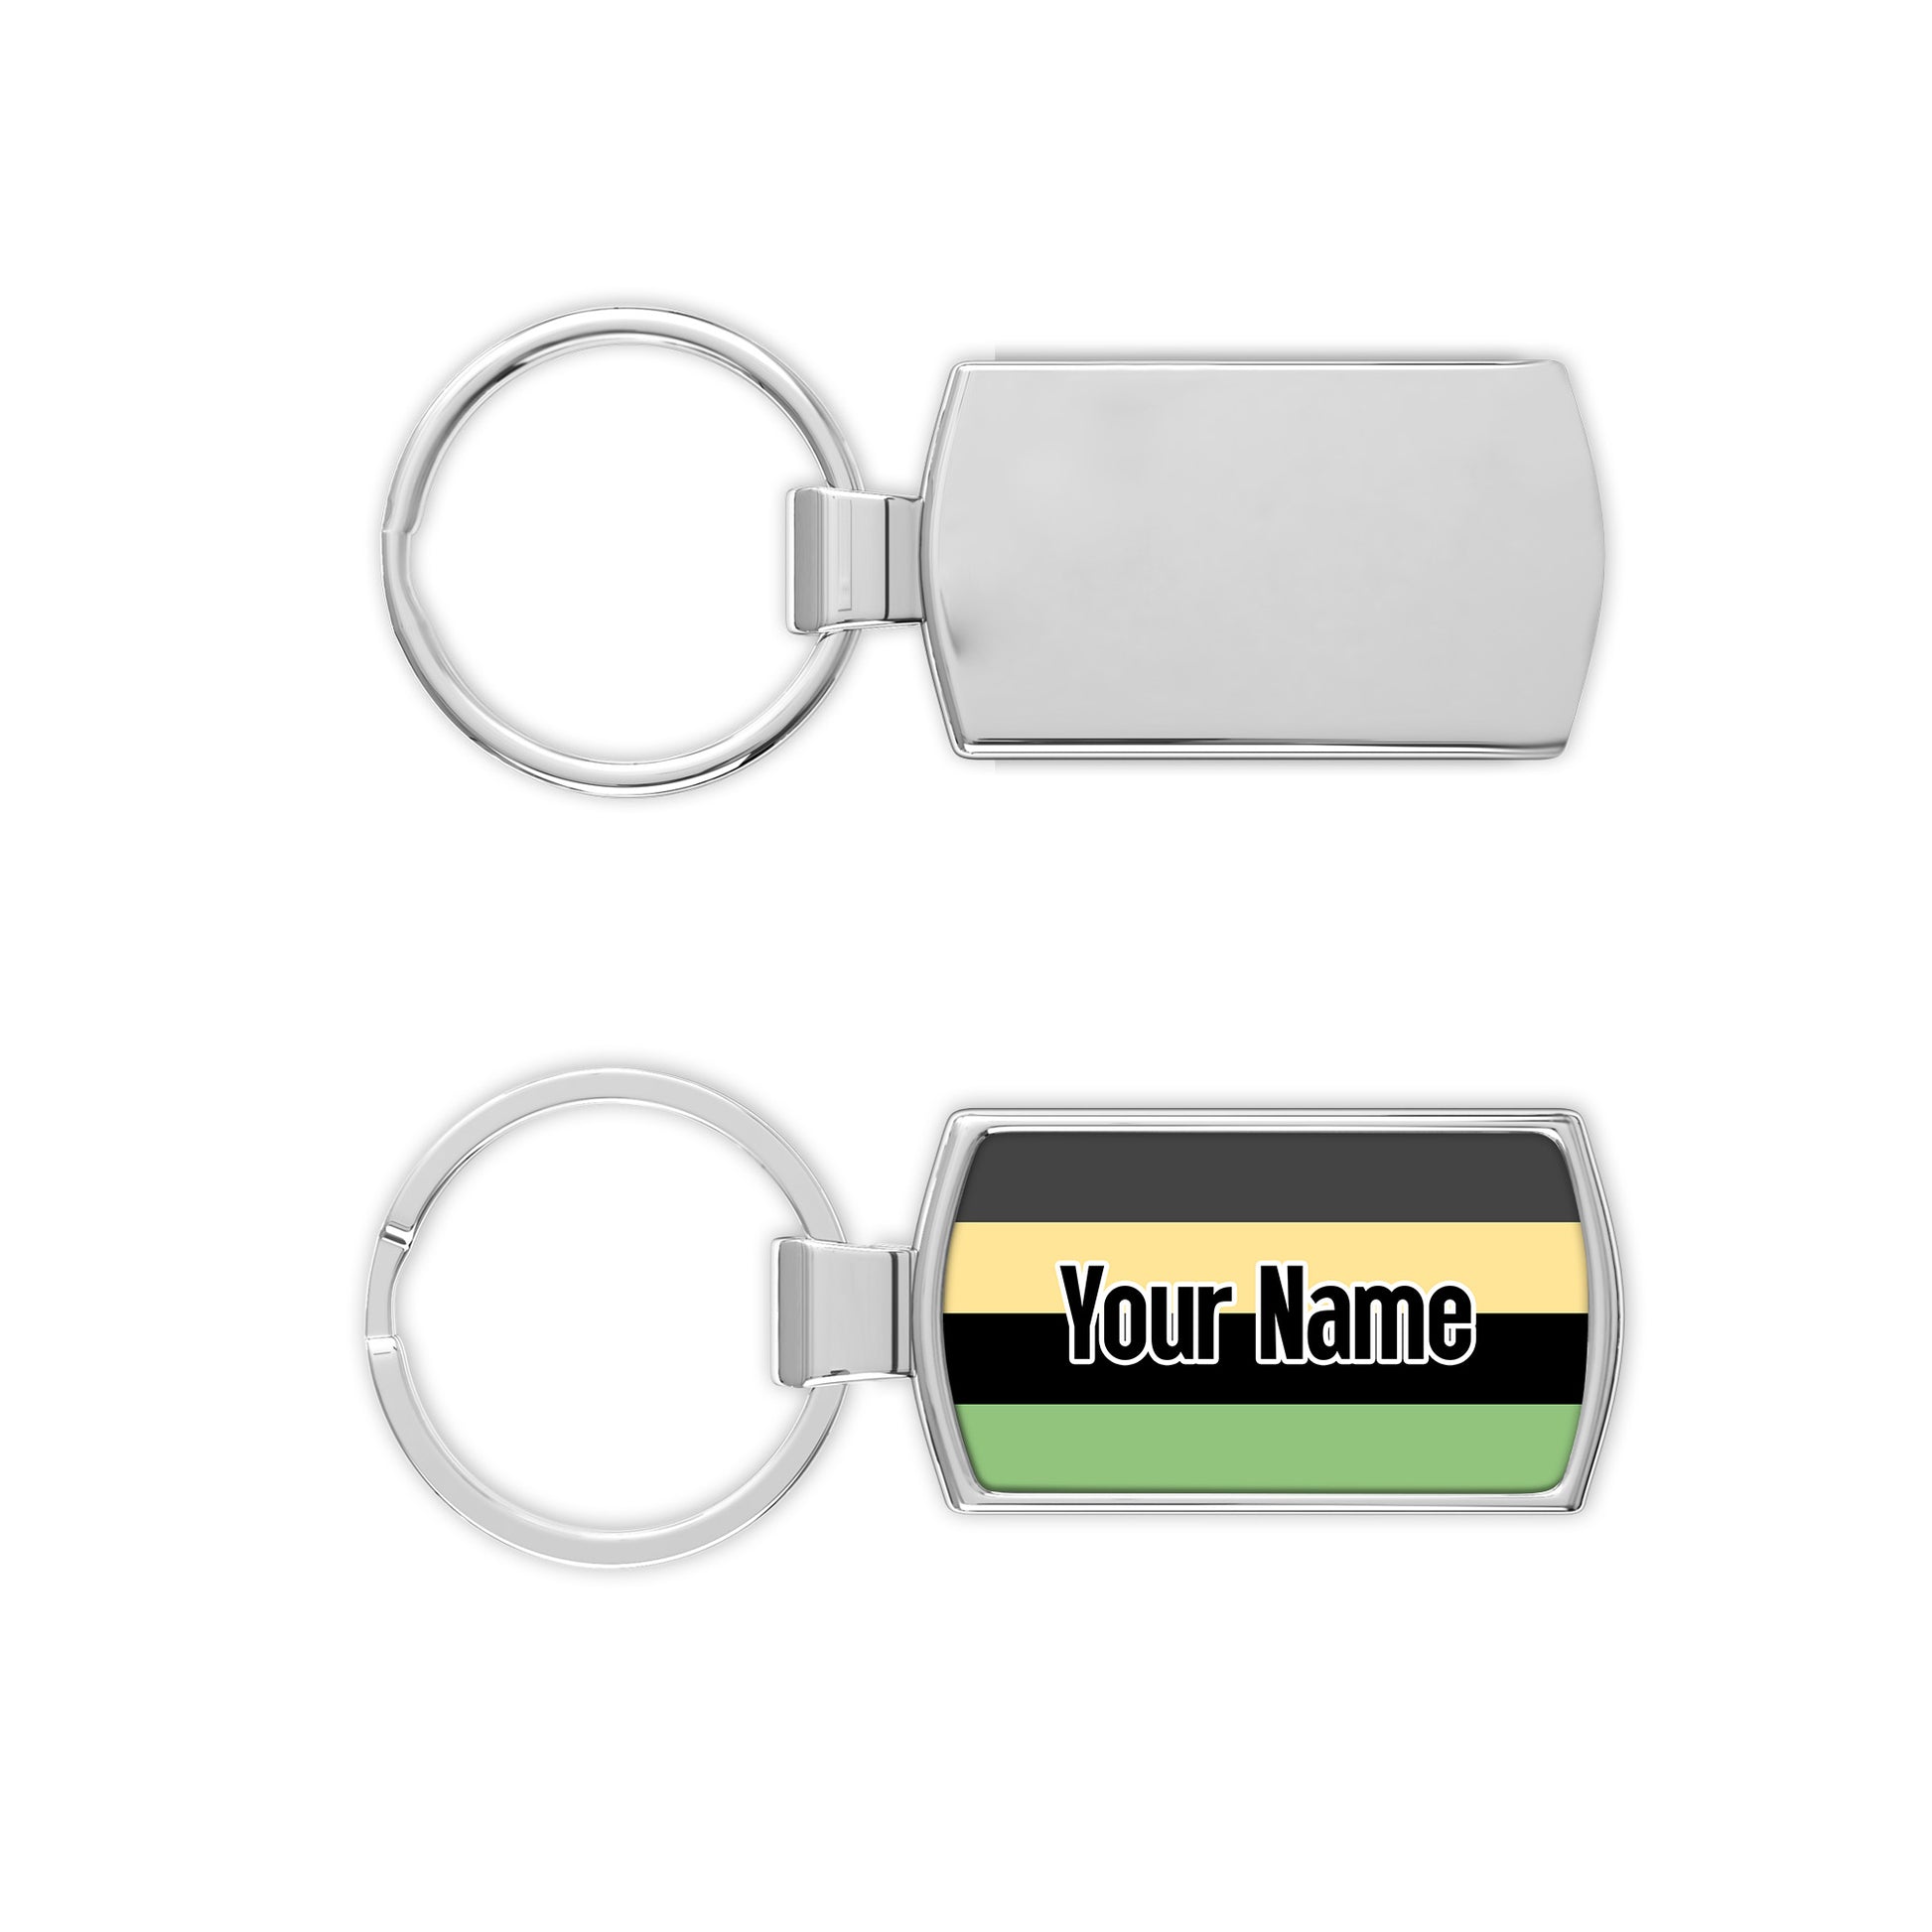 Orchidromantic pride flag metal keyring personalised with your name